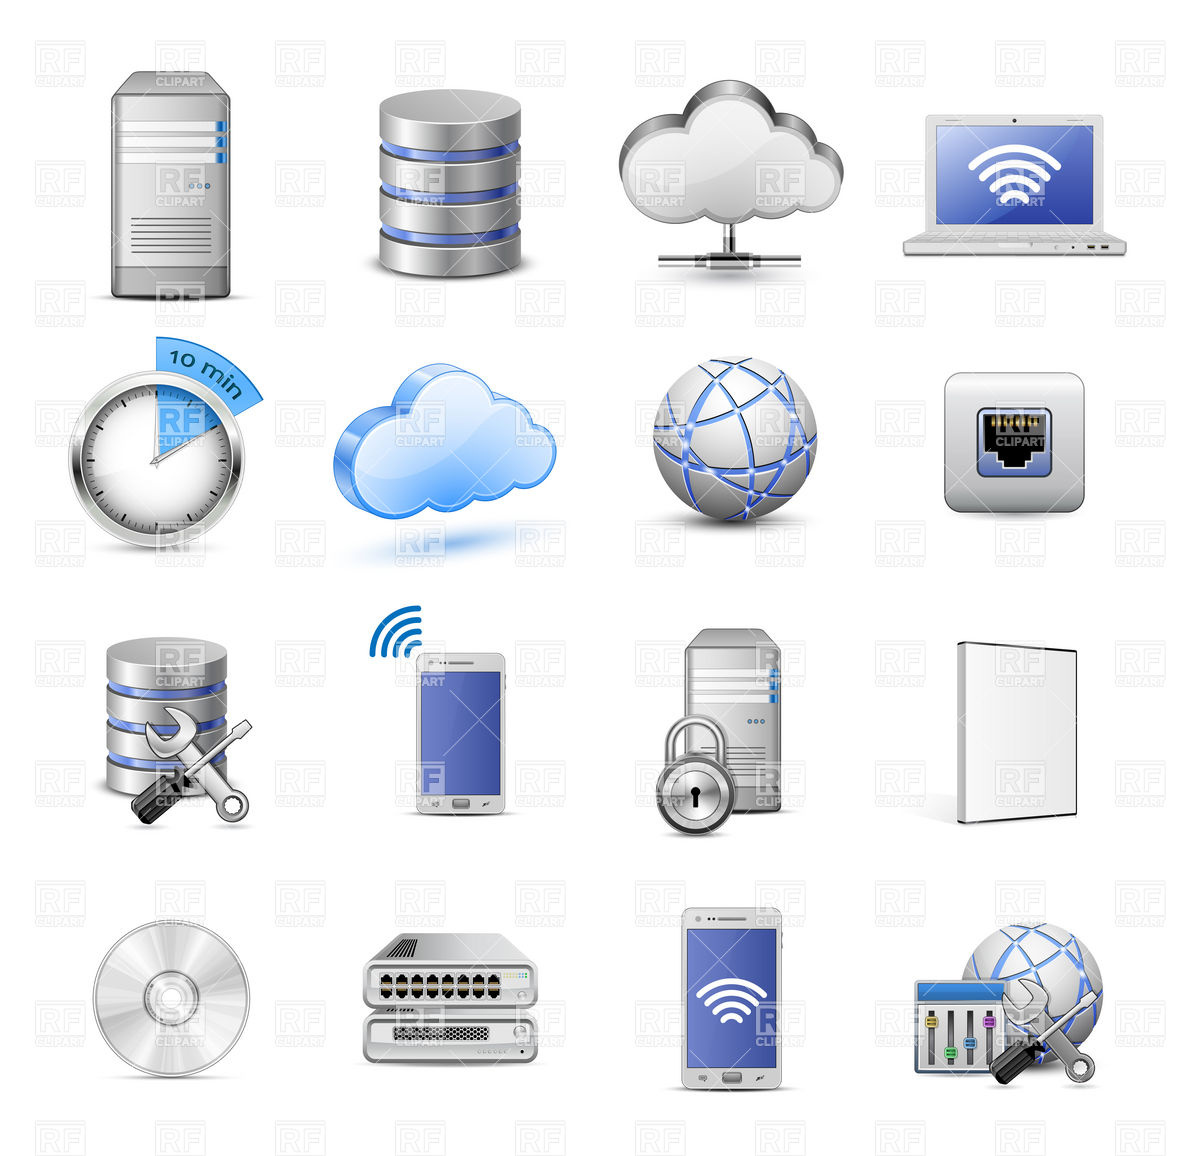 Server Database And Cloud Computing Icon Set 5462 Icons And Emblems    